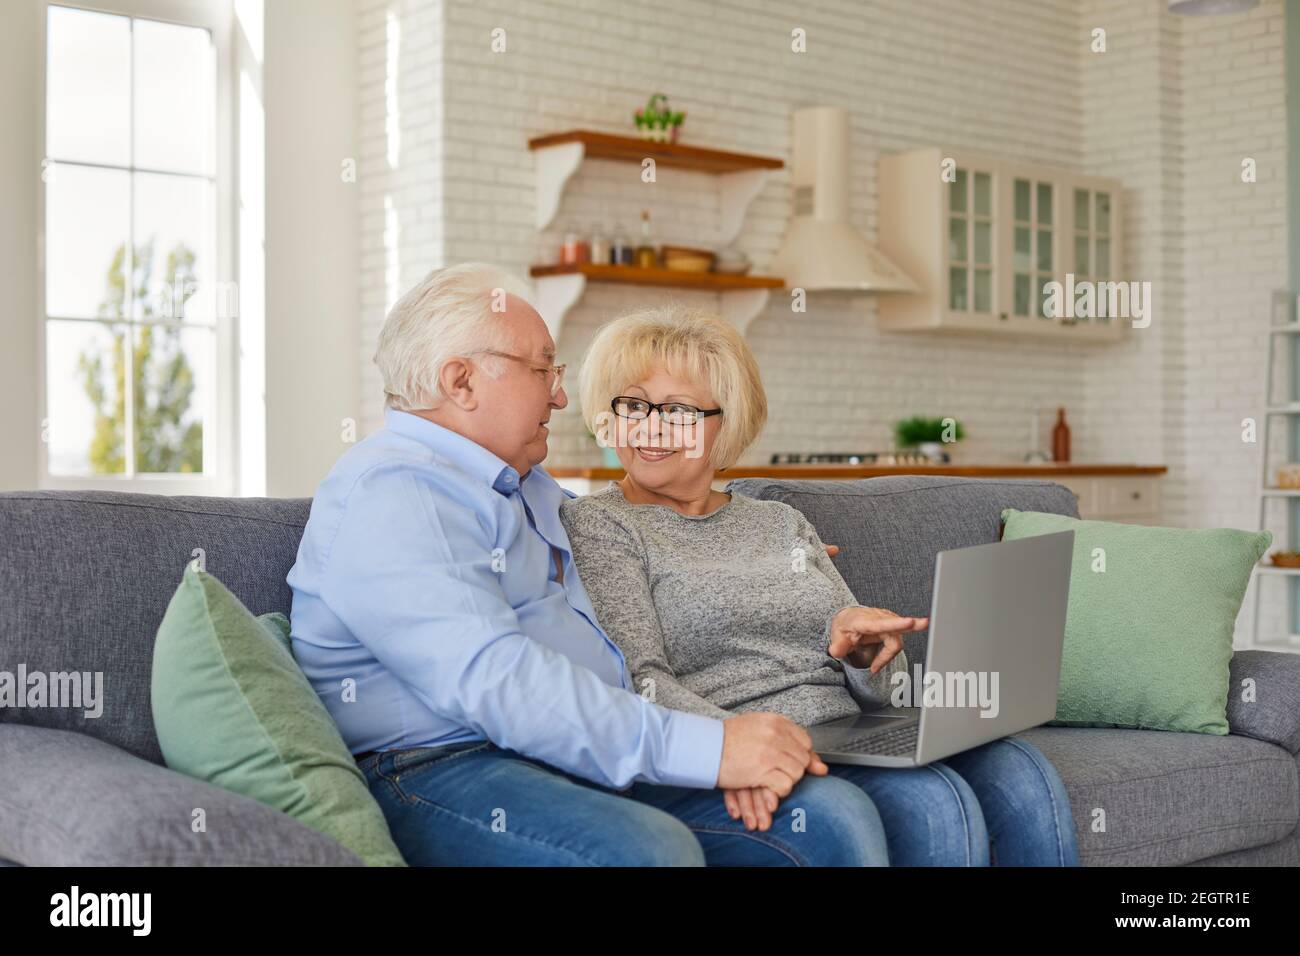 Smiling mature wife and husband looking at laptop screen sitting on sofa in cozy home. Stock Photo